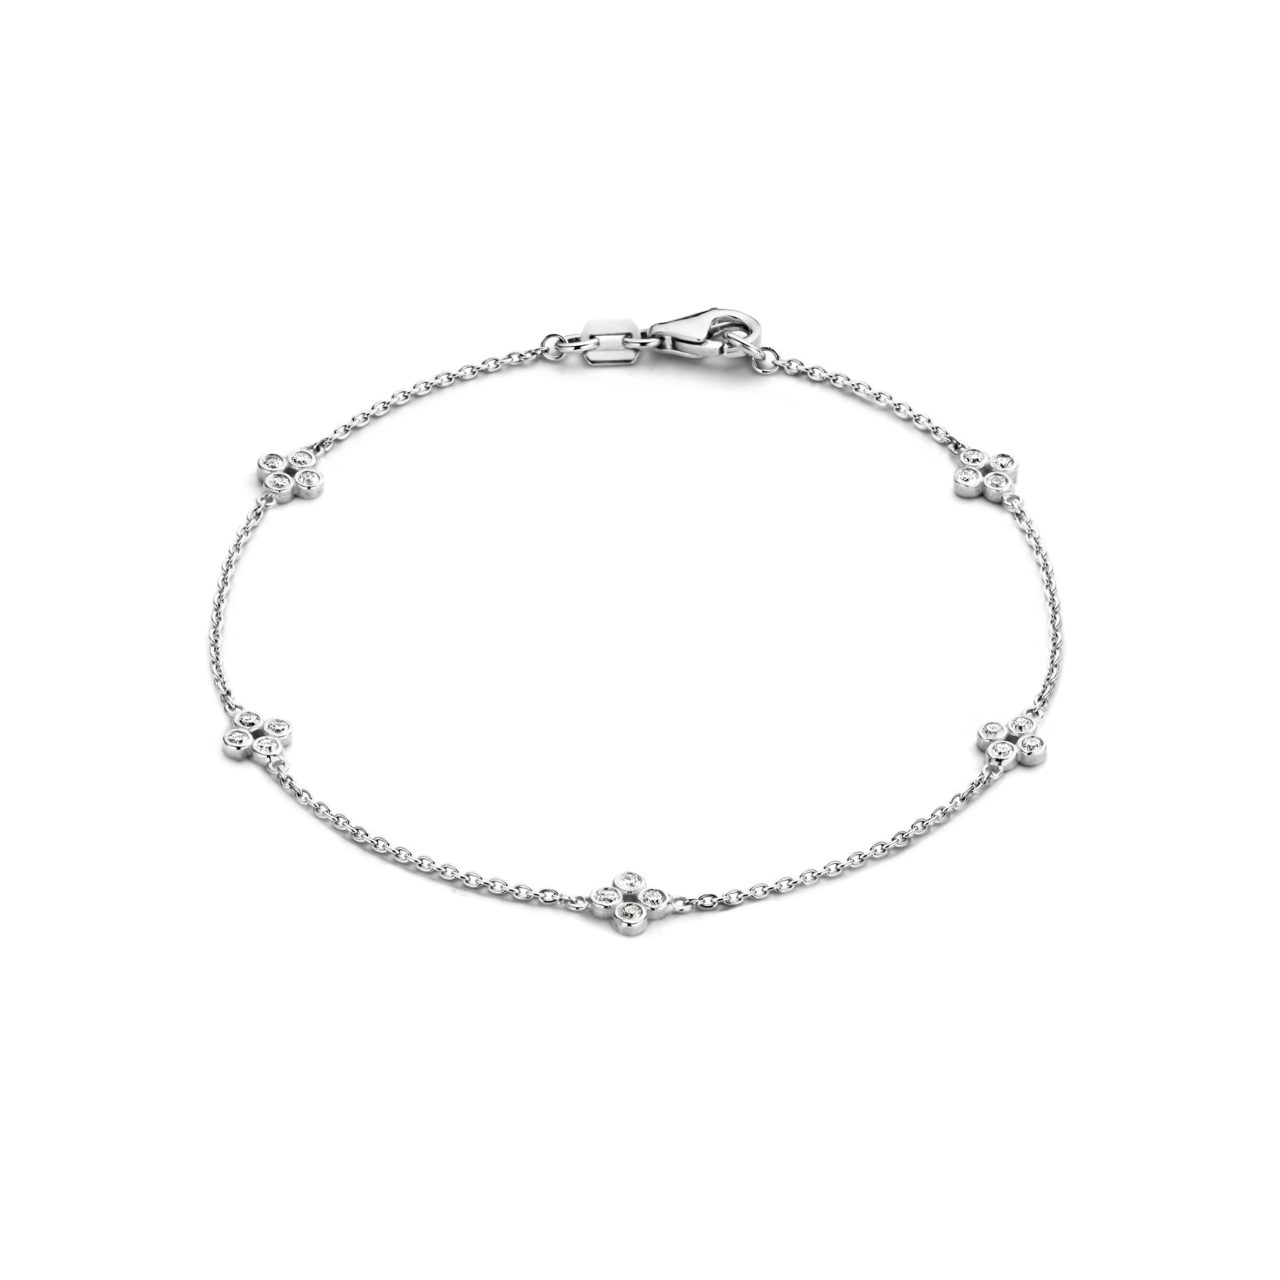 This delicate bracelet has 20 D color, IF/VVS clarity round brilliant diamonds that form sweet floral motifs around the wrist in 18k recycled gold. This bracelet can be adjusted to two different lengths, 6.3" (16 cm) and 6.7" (17 cm). Shown here in White Gold.